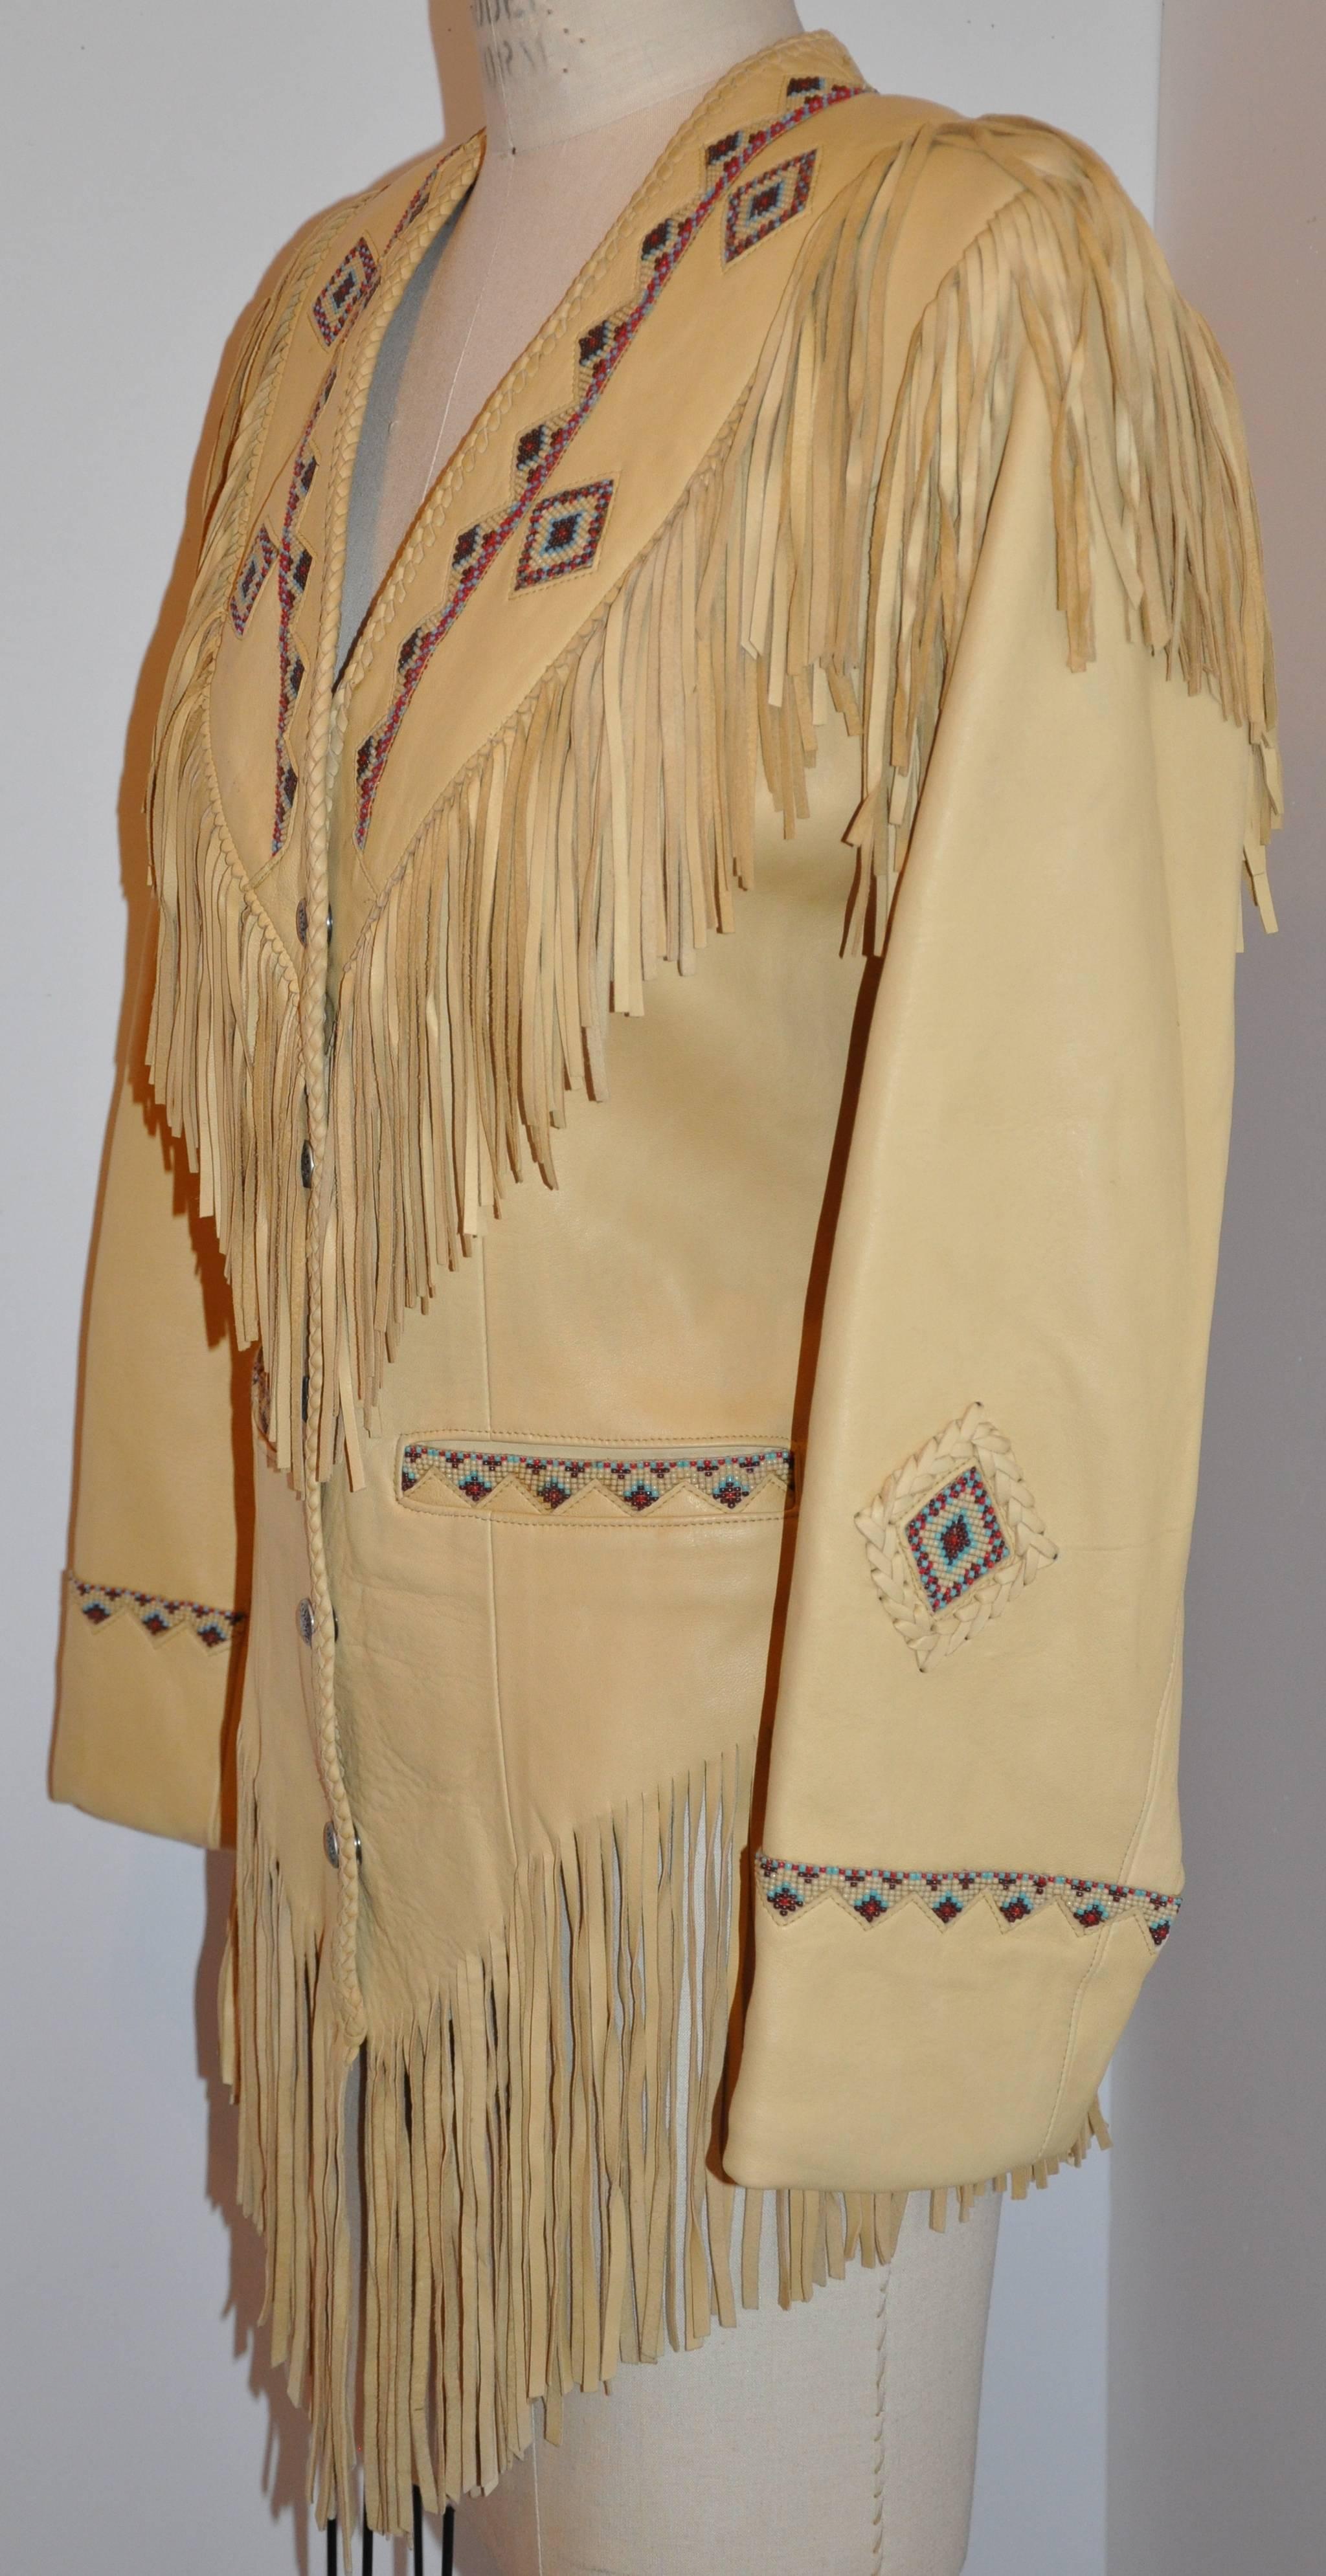       This wonderful detailed West of Santa Fe fully-lined hand-made butter-soft chamois lambskin jacket has details such as hand-done bead-work, hand-cut fringes measuring 5